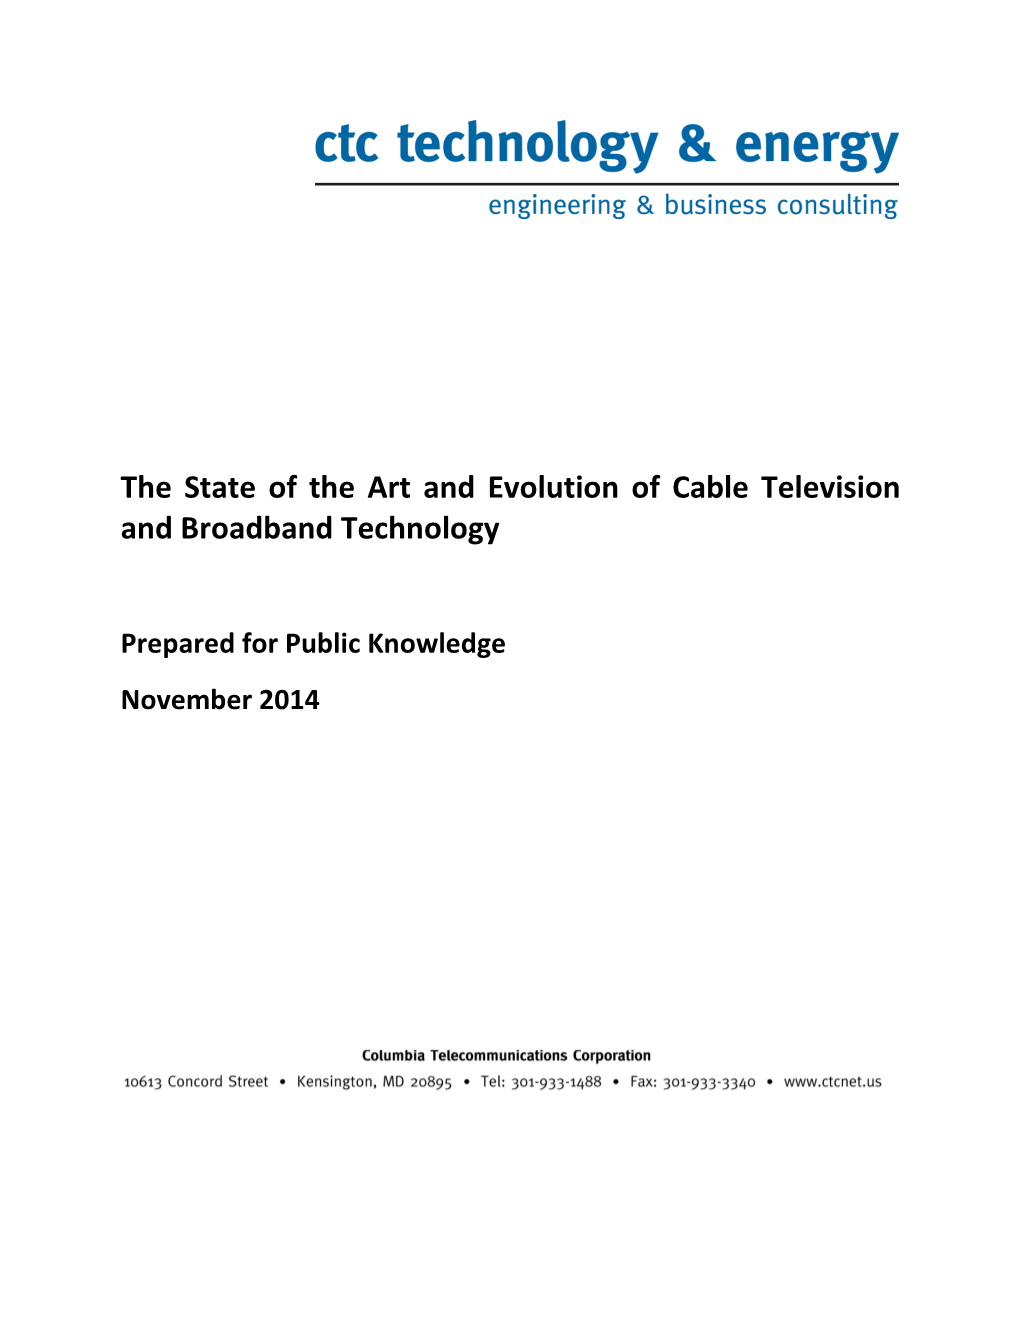 The State of the Art and Evolution of Cable Television and Broadband Technology